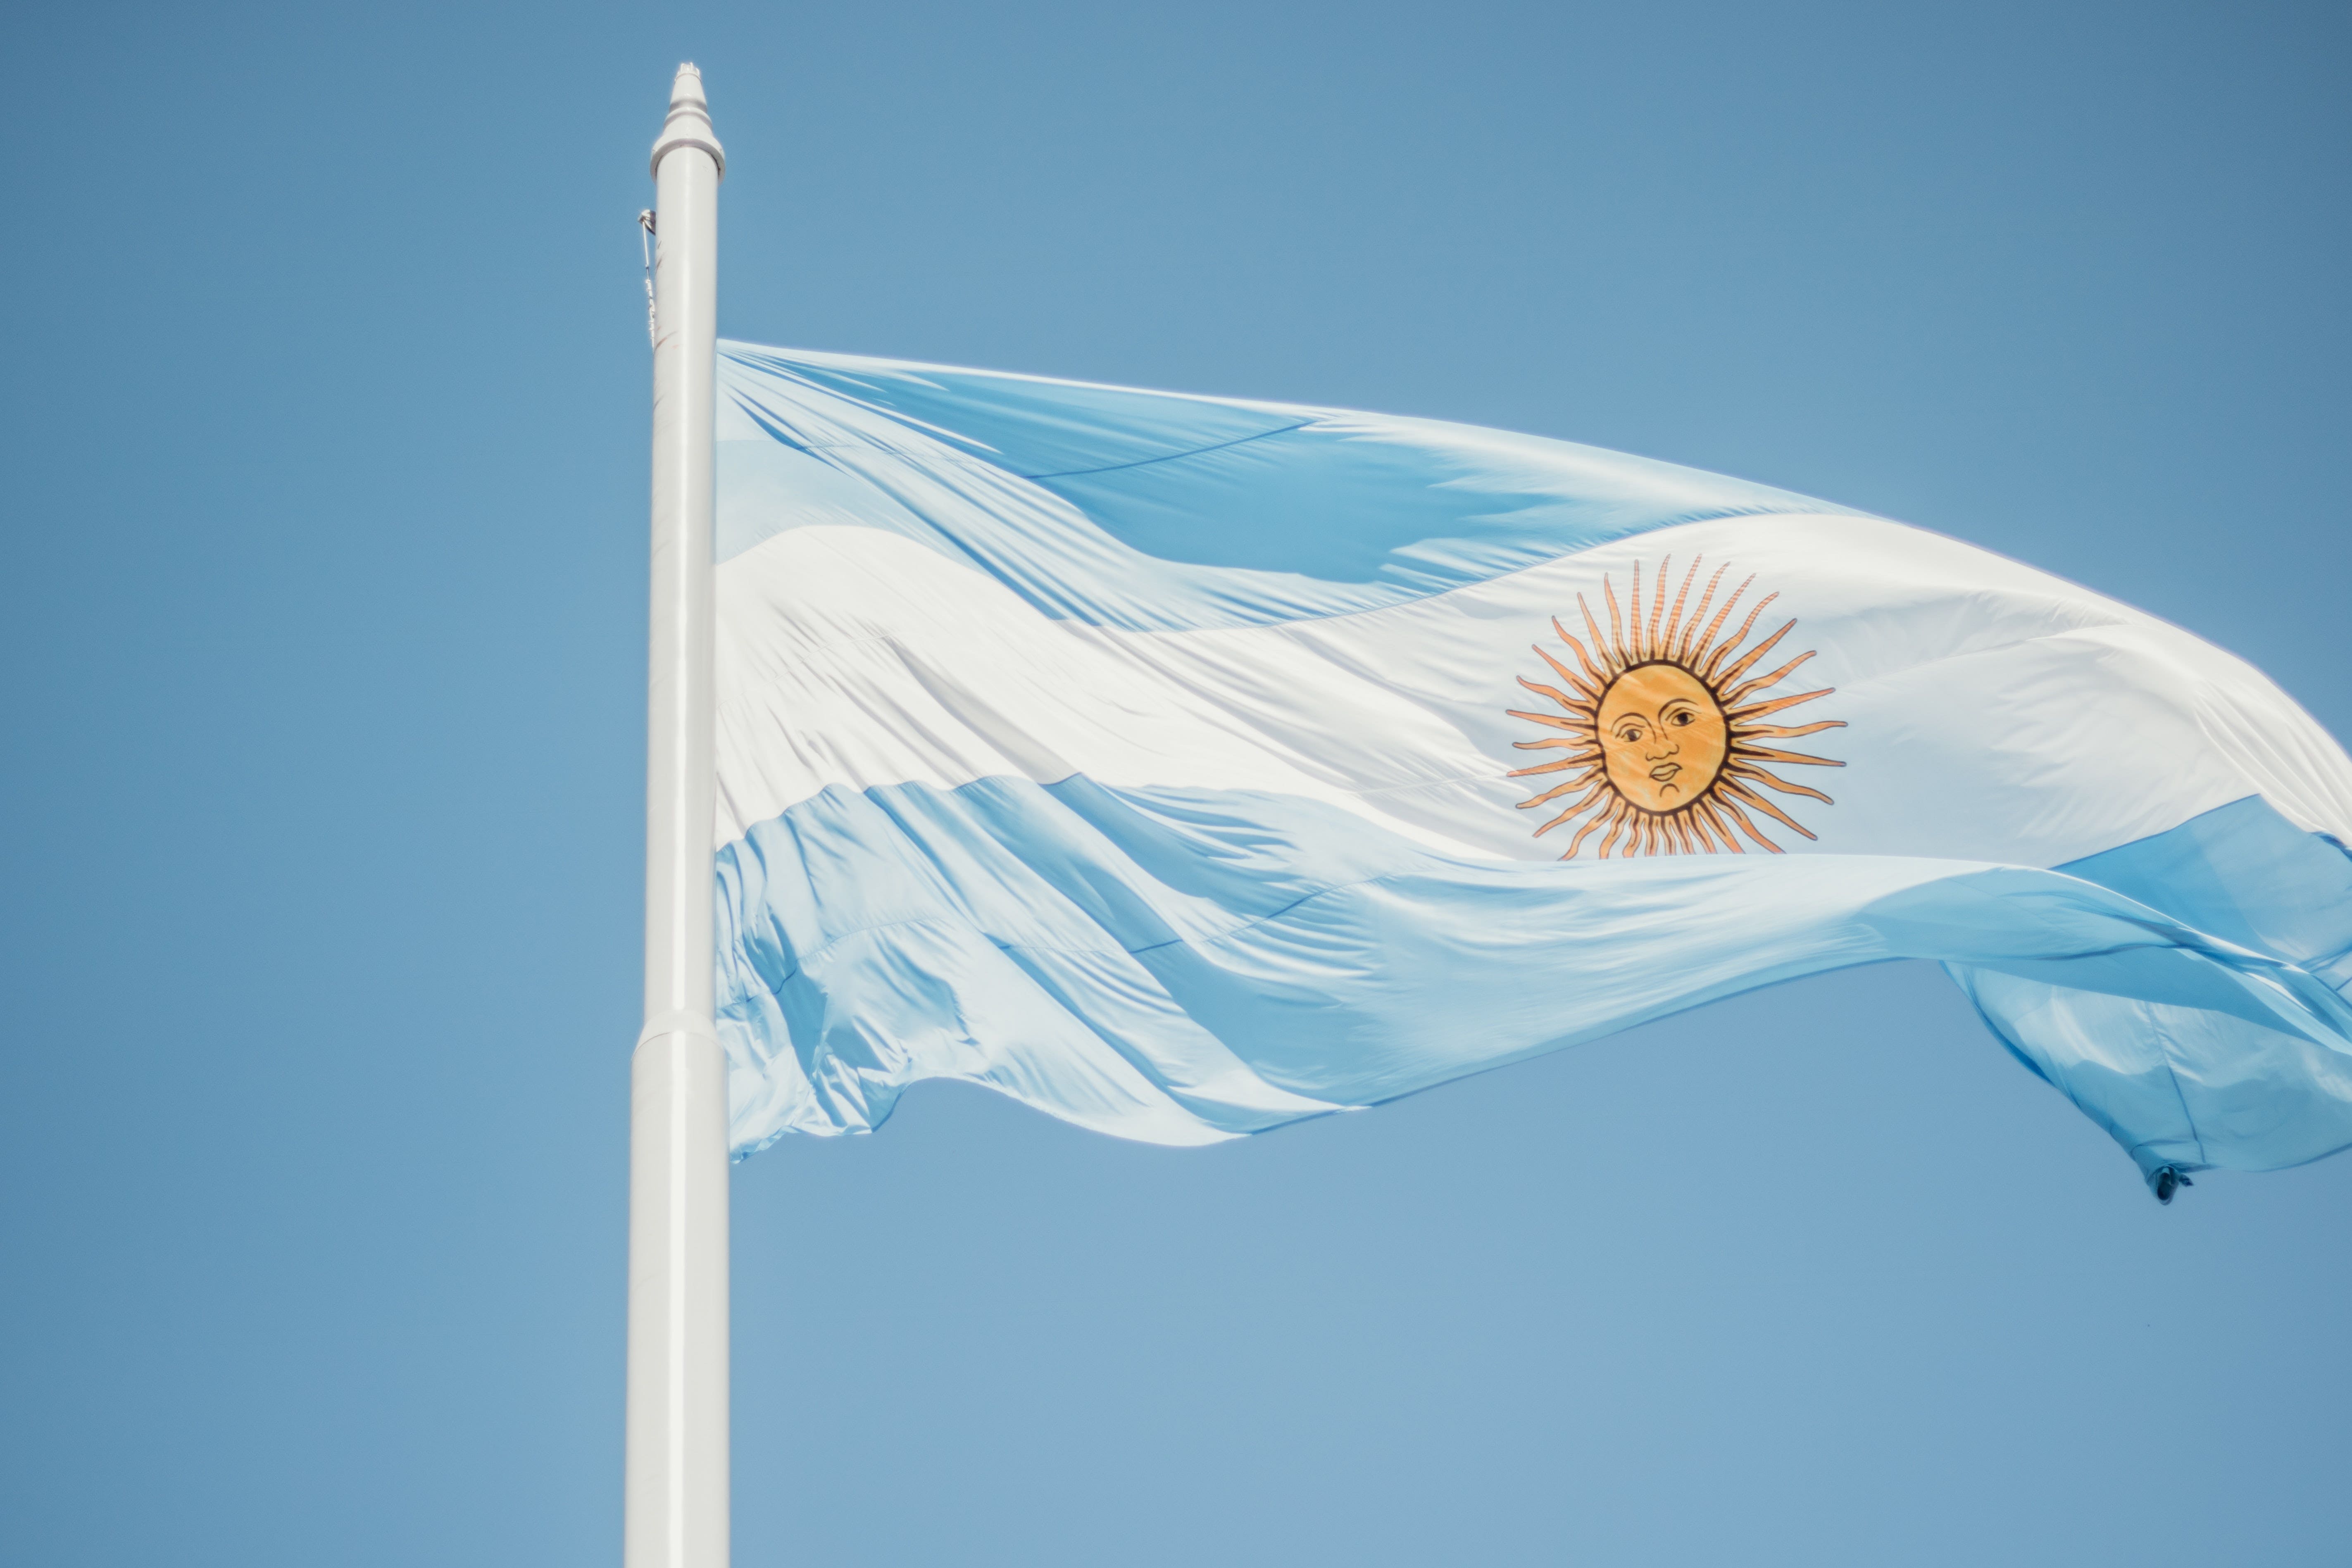 Argentina's Inflation Up To 71%, Central Bank Raises Interest Rates: What's Next?